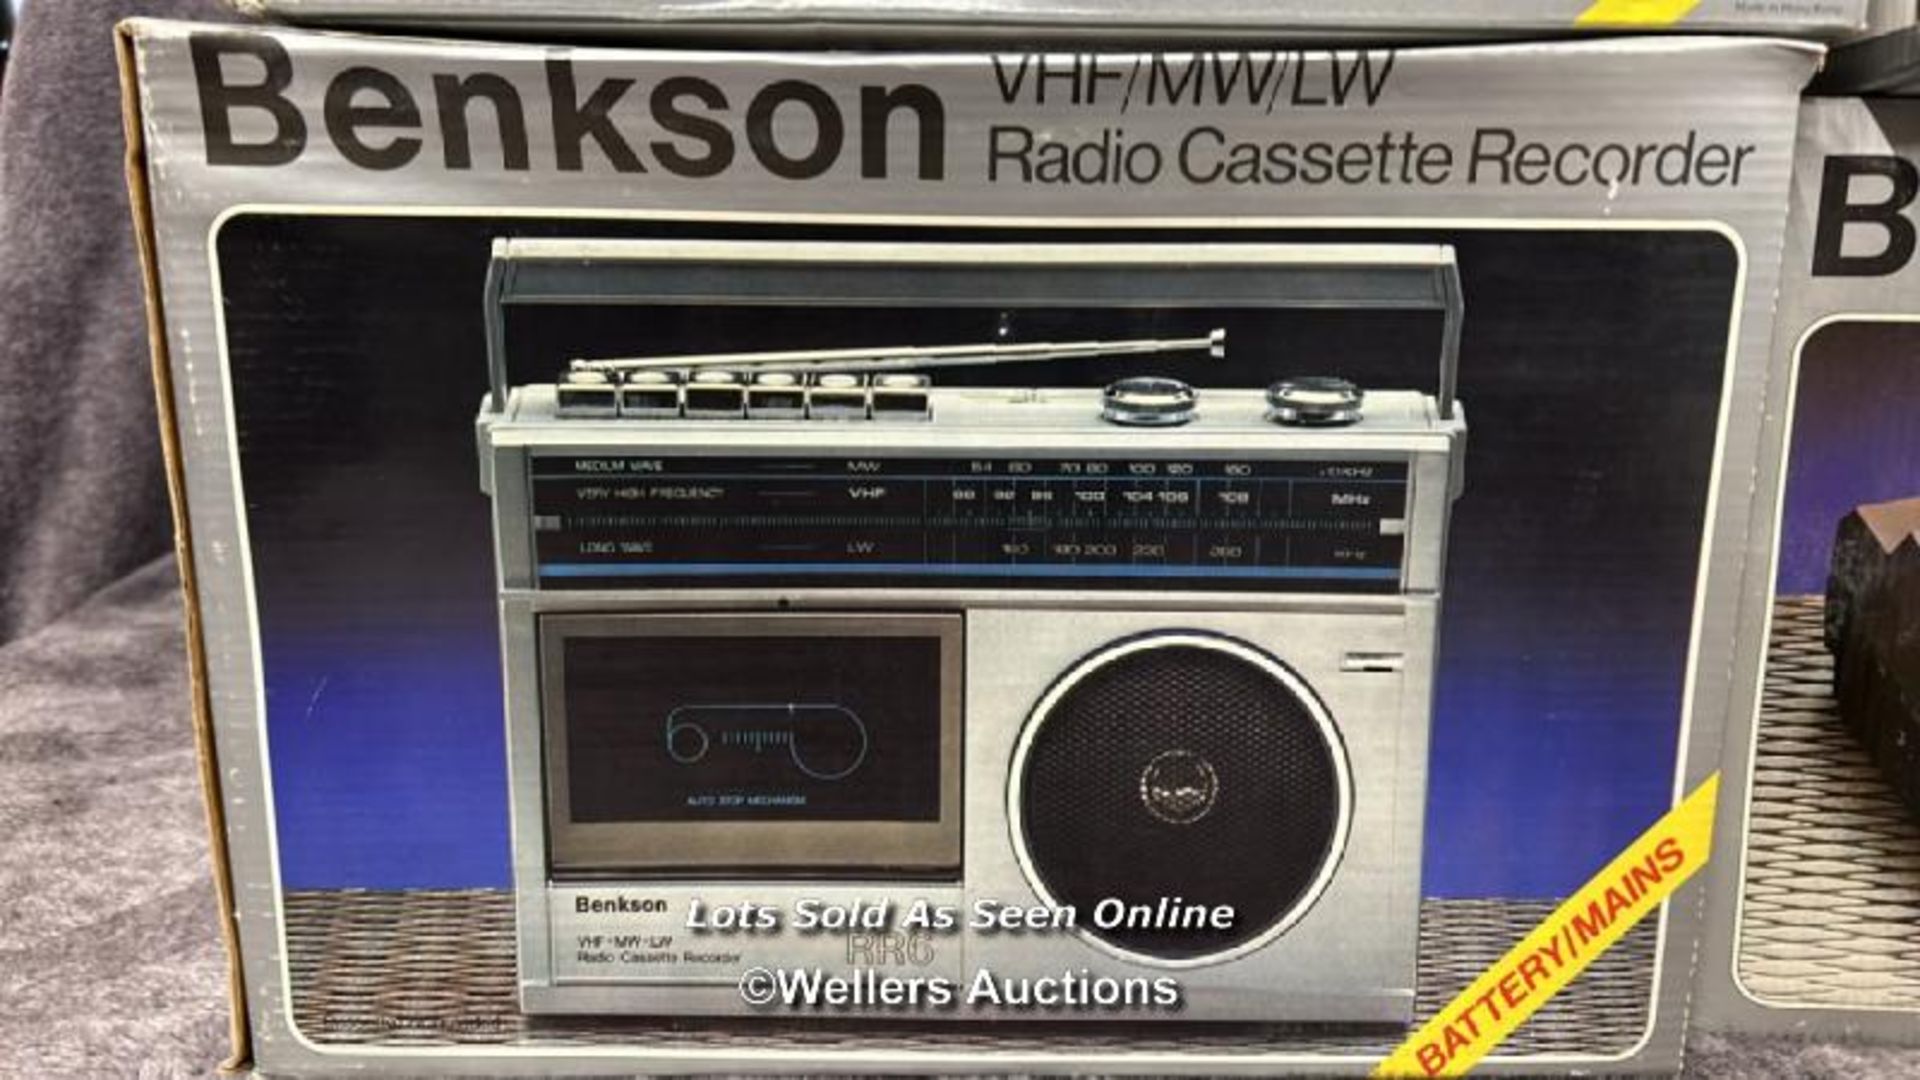 Four boxed Benkson cassette recorders and radios, from the private collection of the founder of - Image 3 of 5